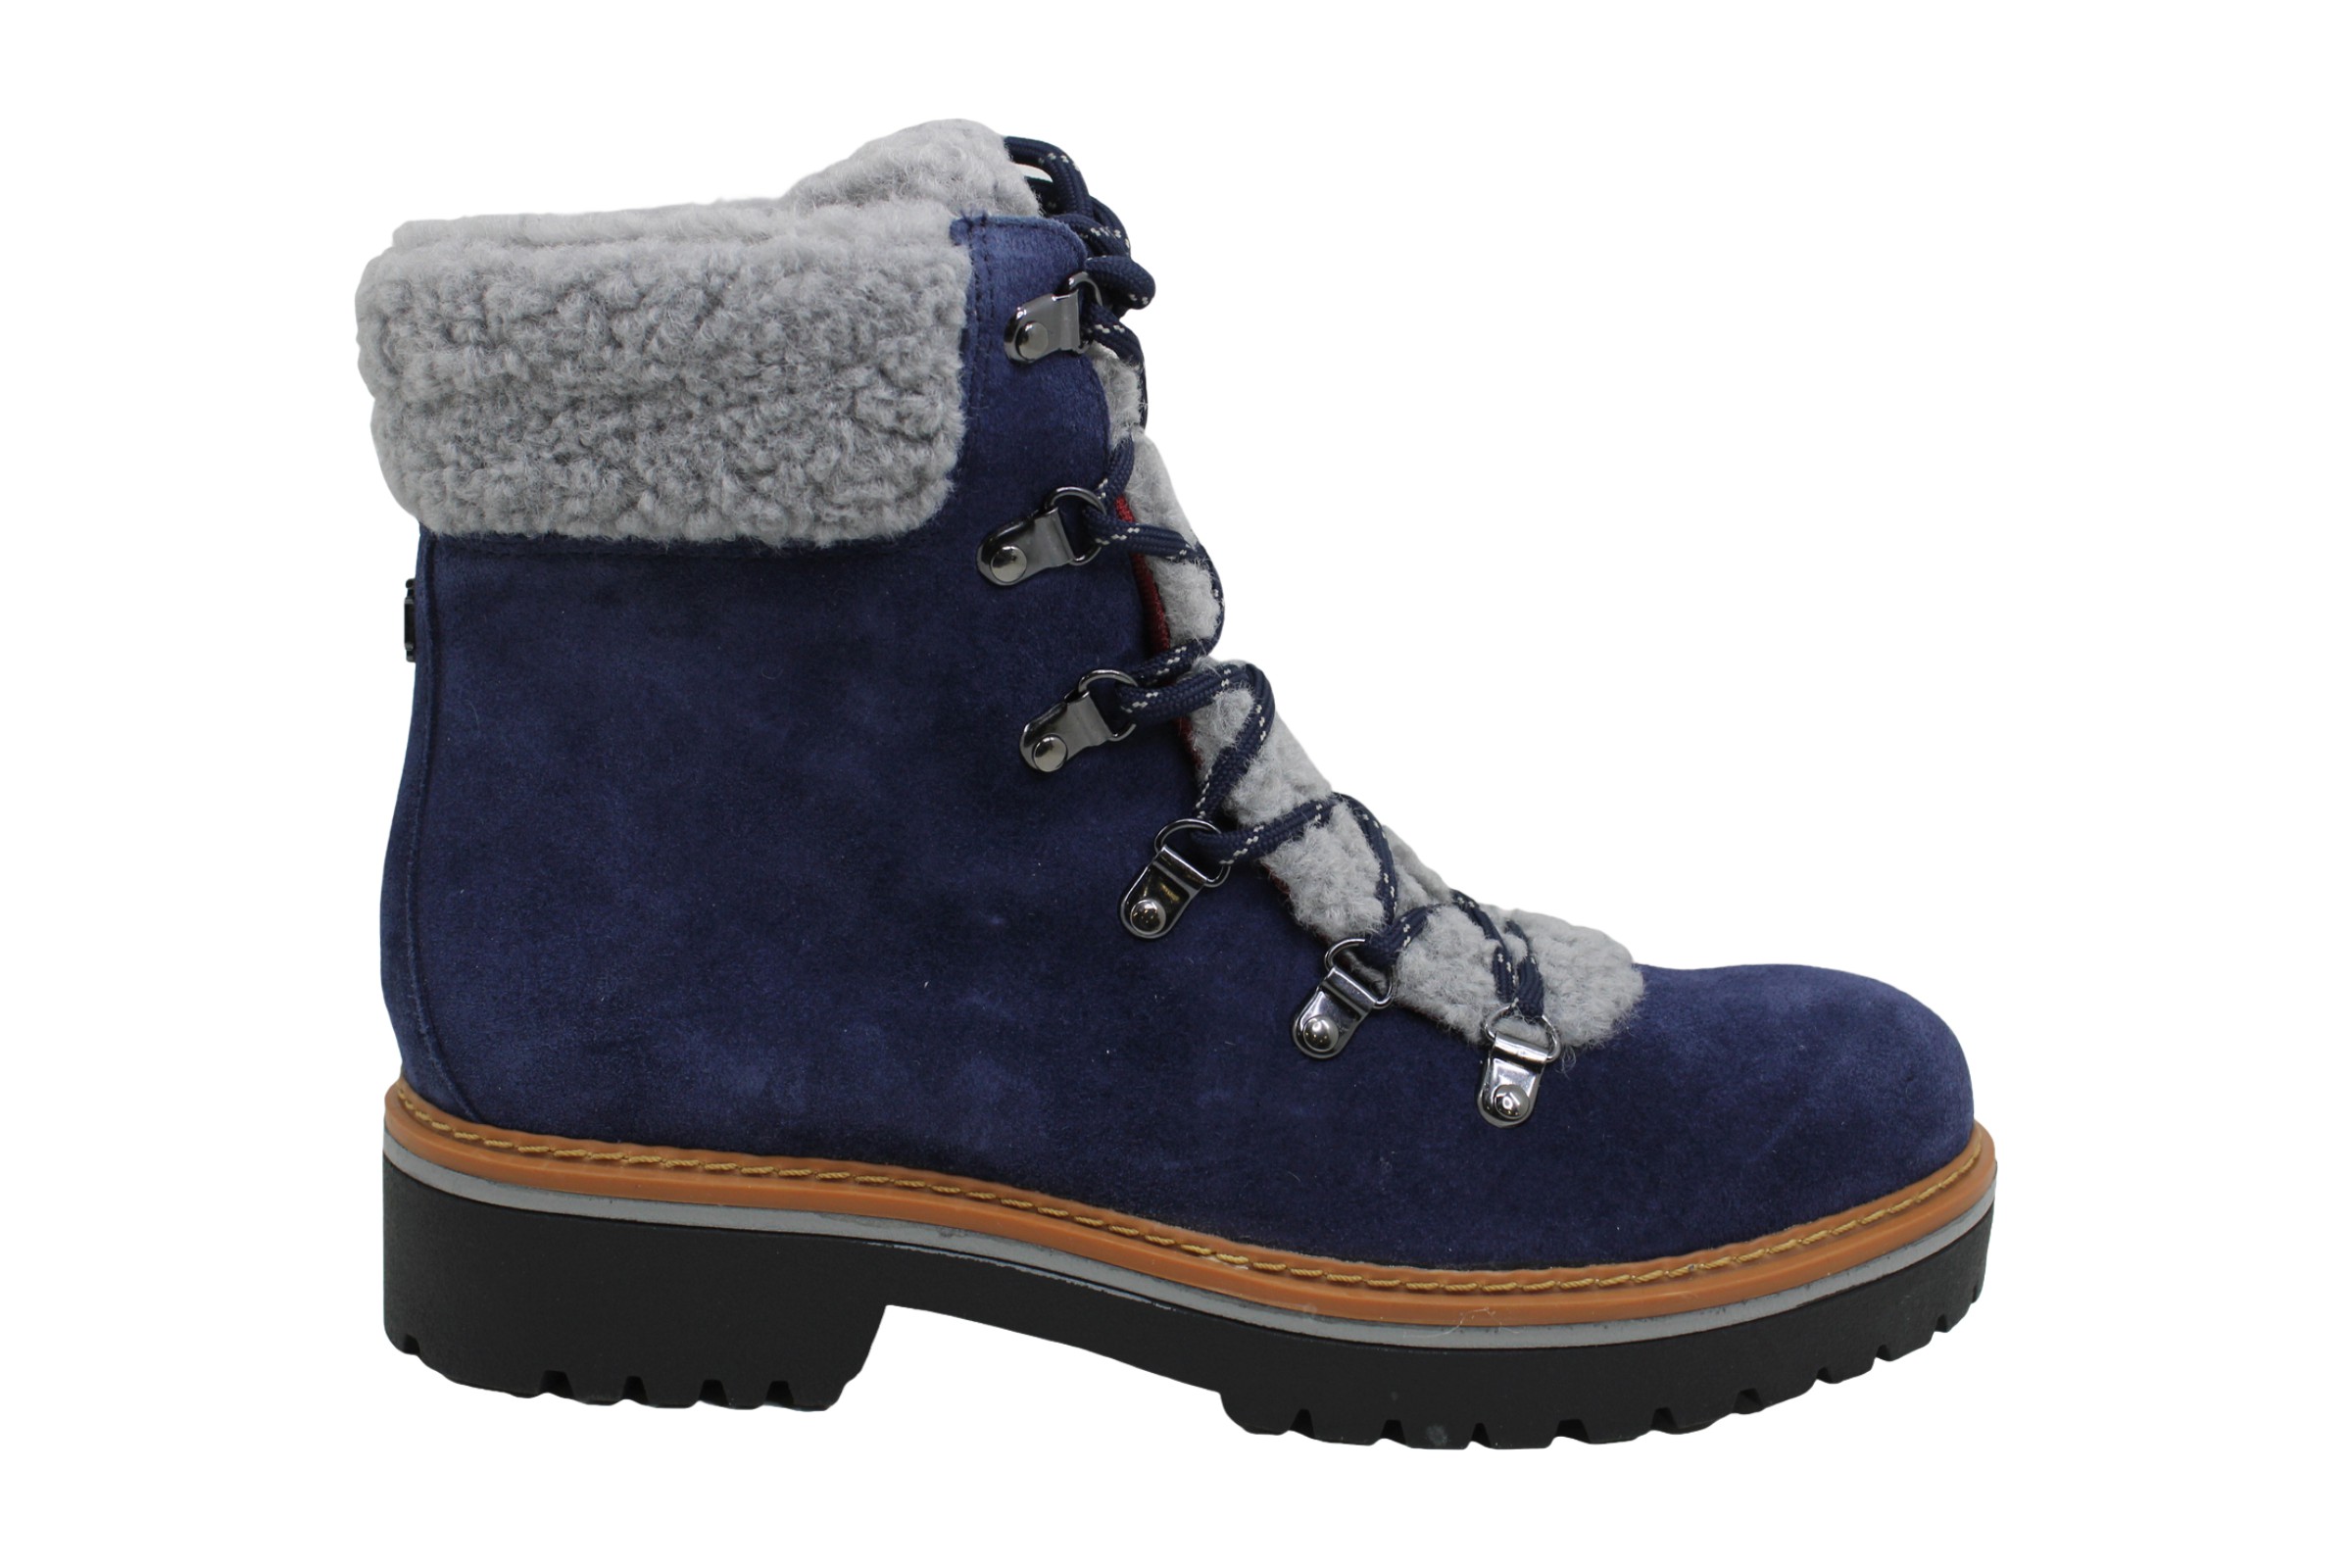 Tommy Hilfiger Womens ron Round Toe Ankle Fashion Boots, Blue, Size 8.5 ...